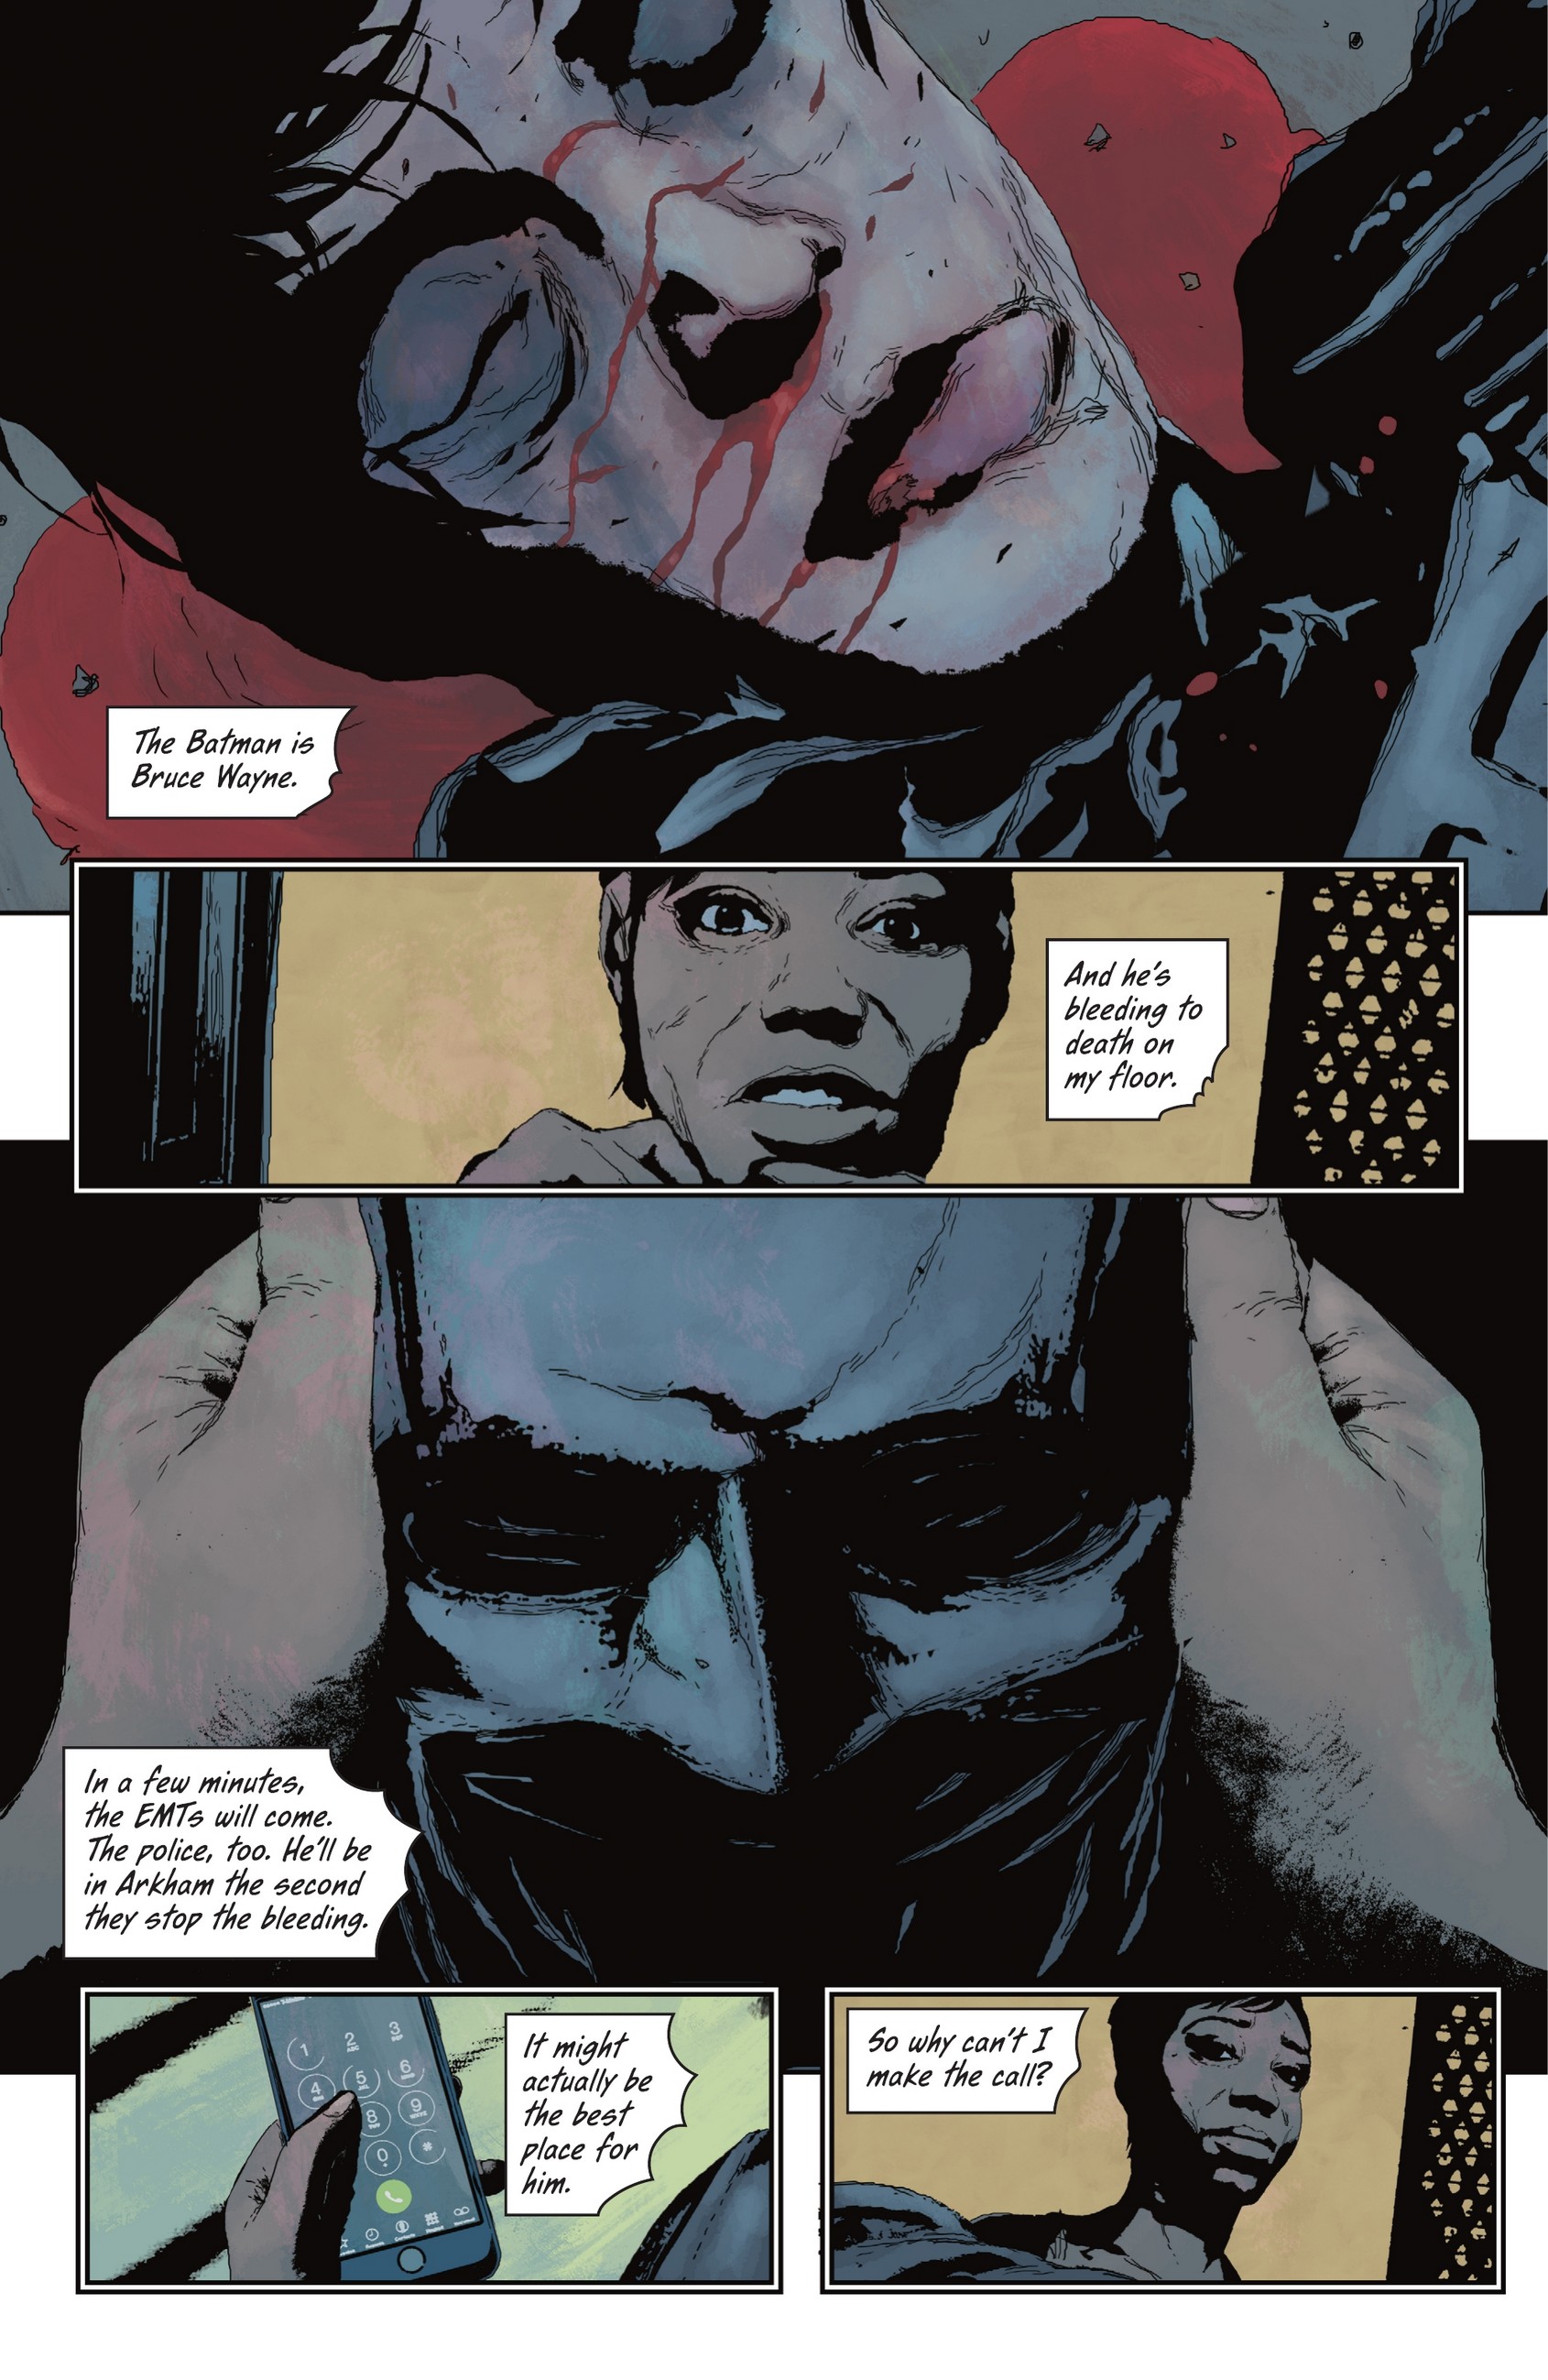 Batman The Imposter 2021 Chapter 1 Page 33 4943